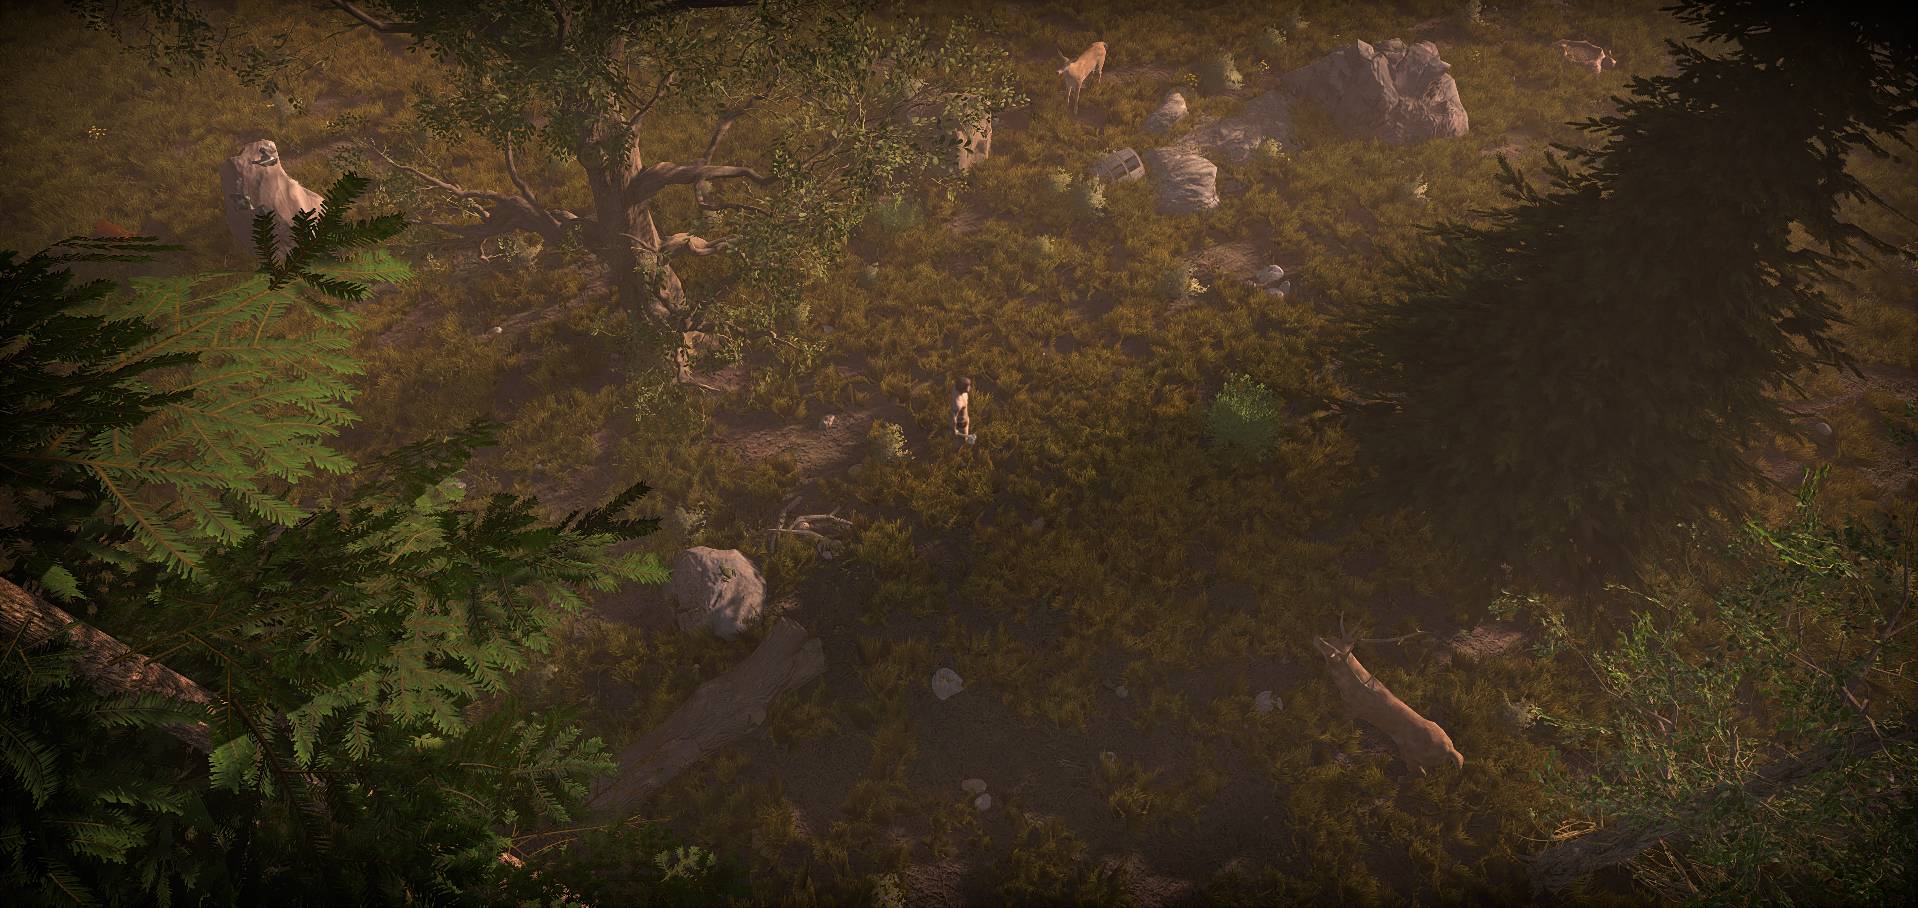 xE11vG7 - Our game in development Wild Terra 2: New Lands. Open world MMO. - RaGEZONE Forums